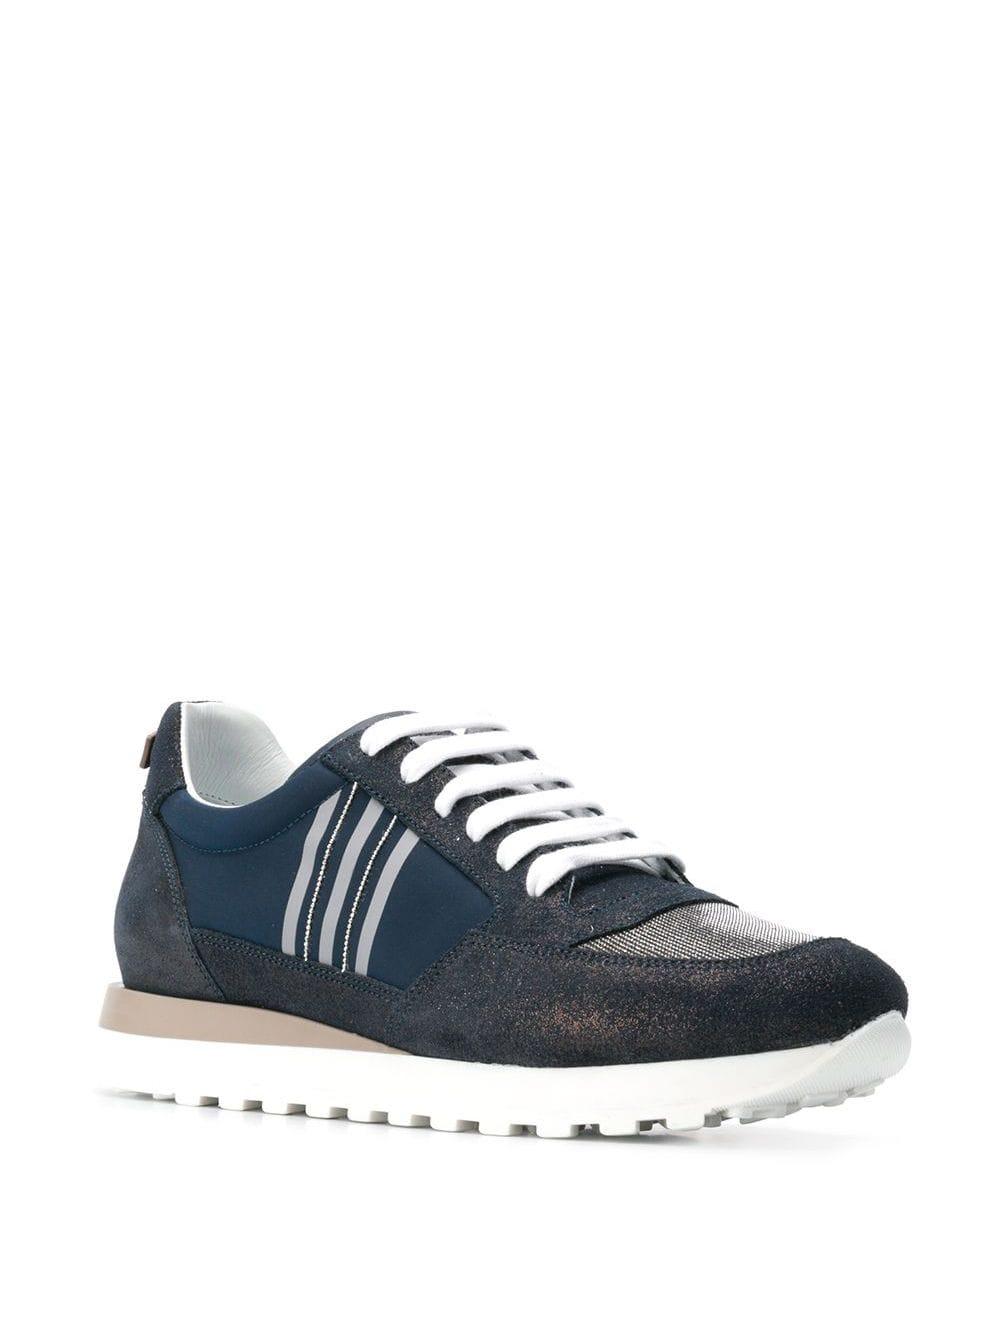 Peserico Leather Contrast Low-top Sneakers in Blue - Lyst